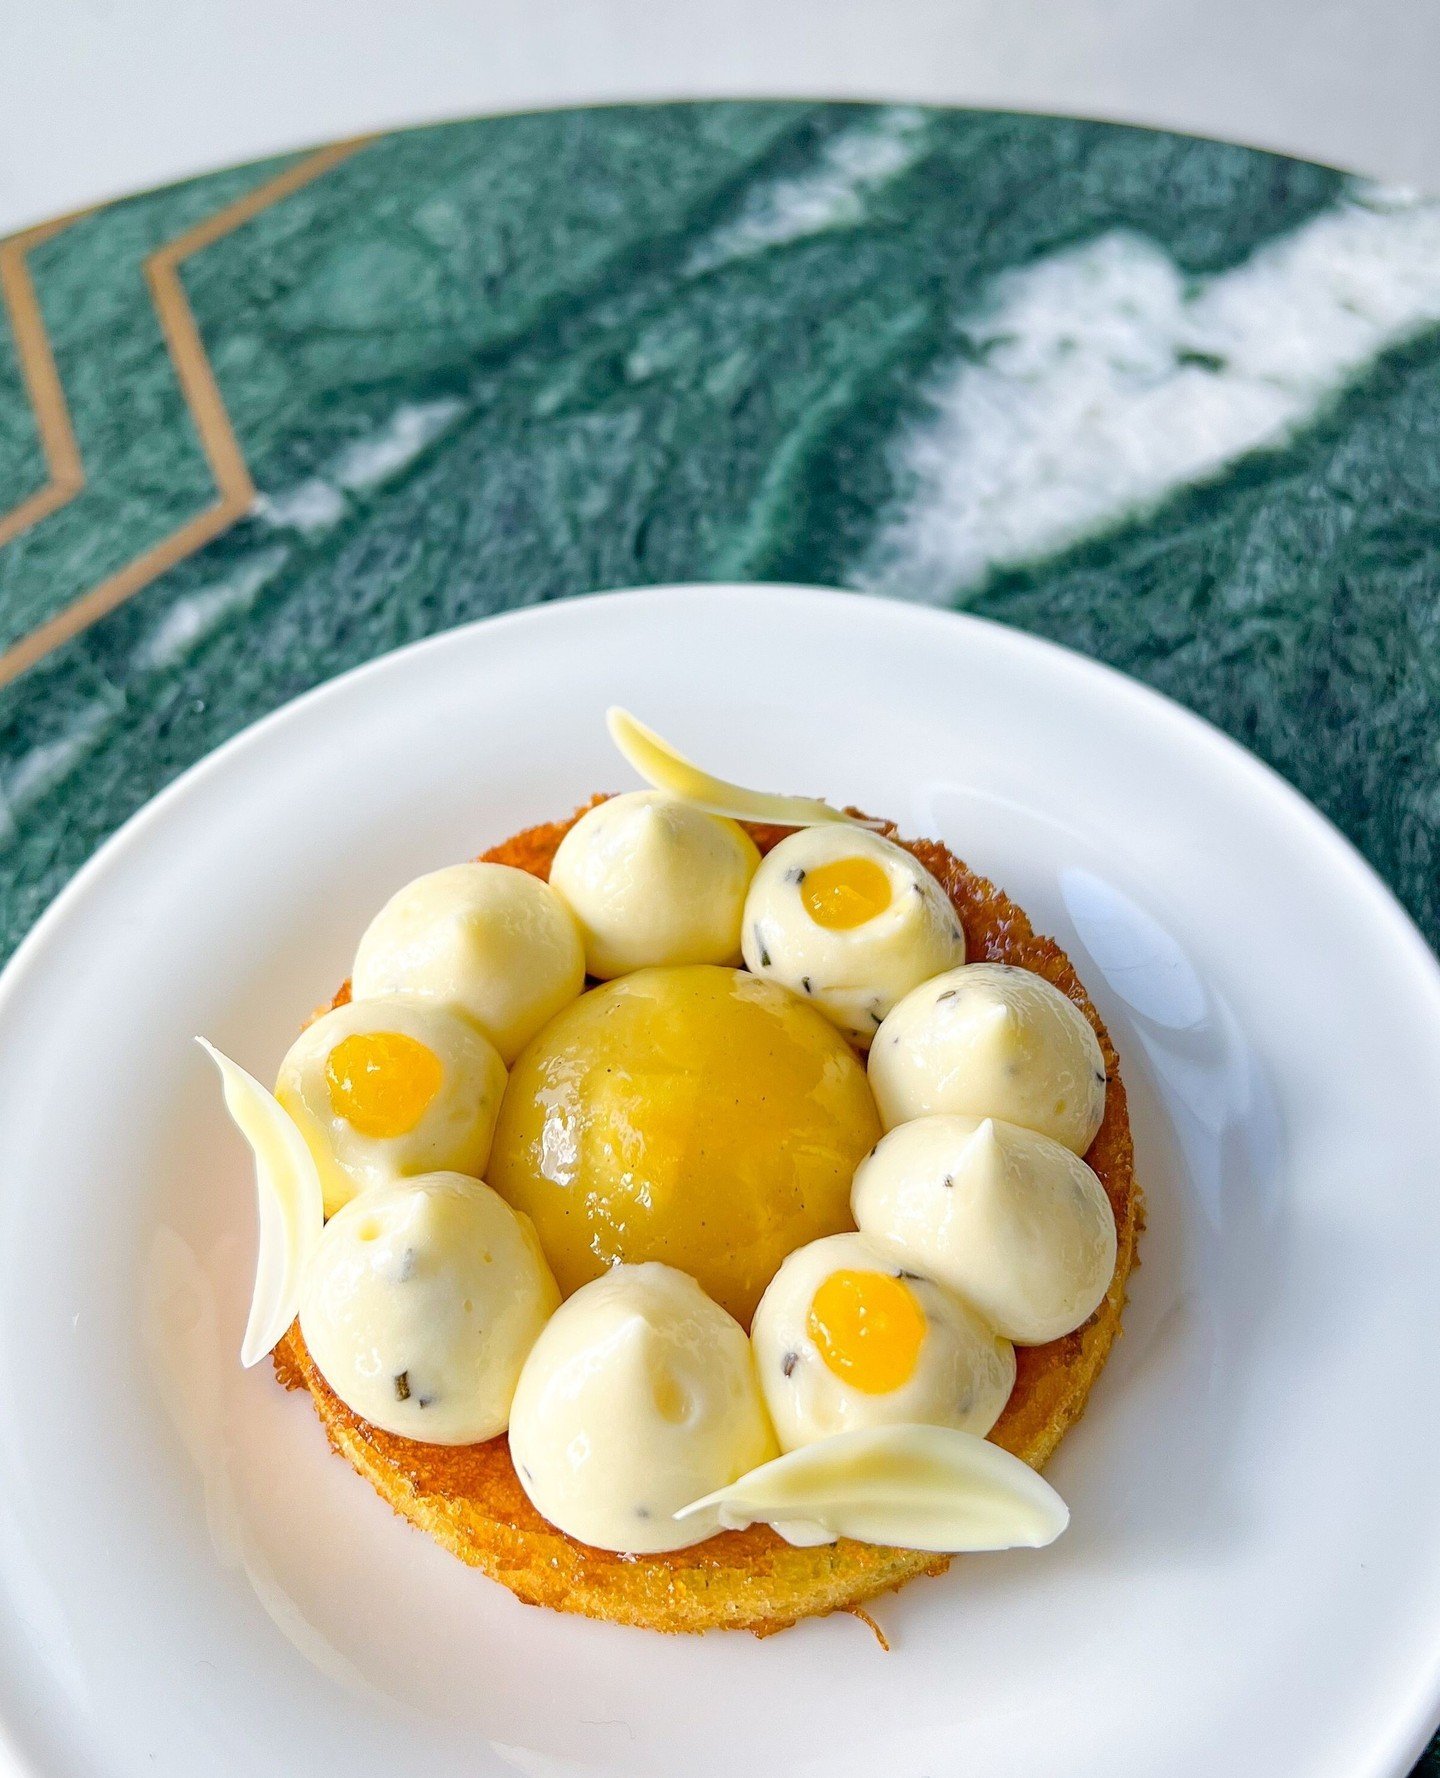 We are excited to announce our newest creation, the Pineapple Rosemary cake! This delectable dessert boasts a perfect balance of zesty citrus taste, topped with a sweet mandarin pineapple gel, a rich pineapple compote, and a fragrant rosemary cr&egra